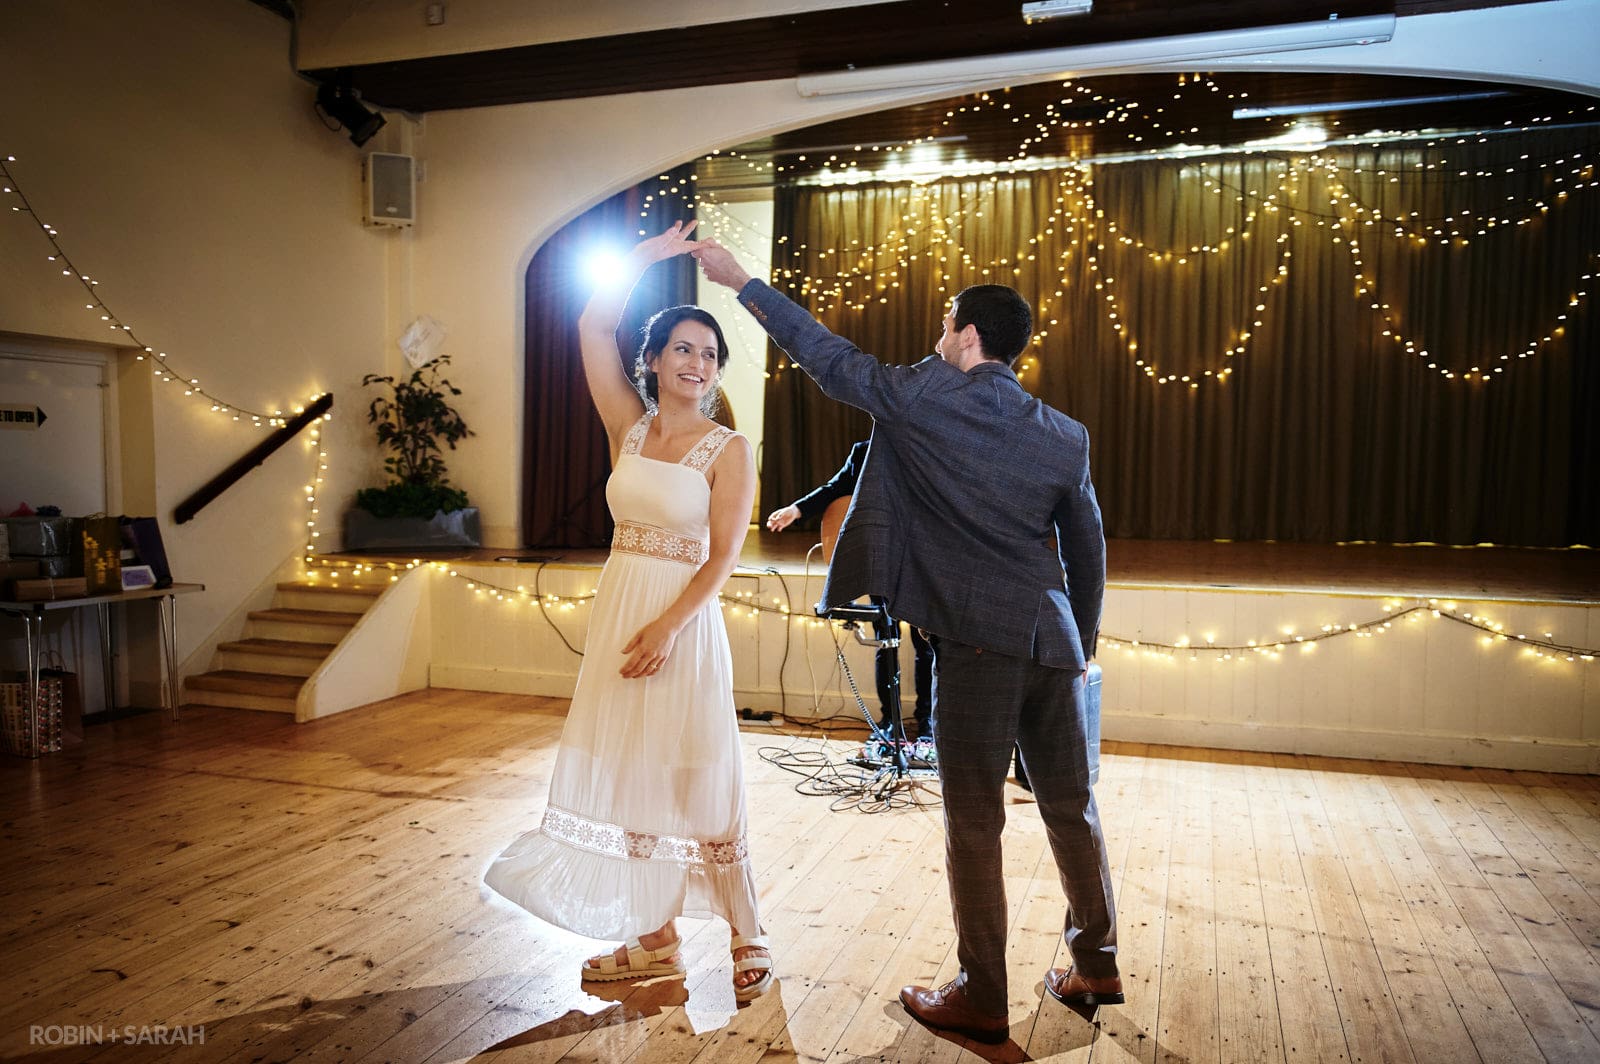 Bride and groom first dance in village hall